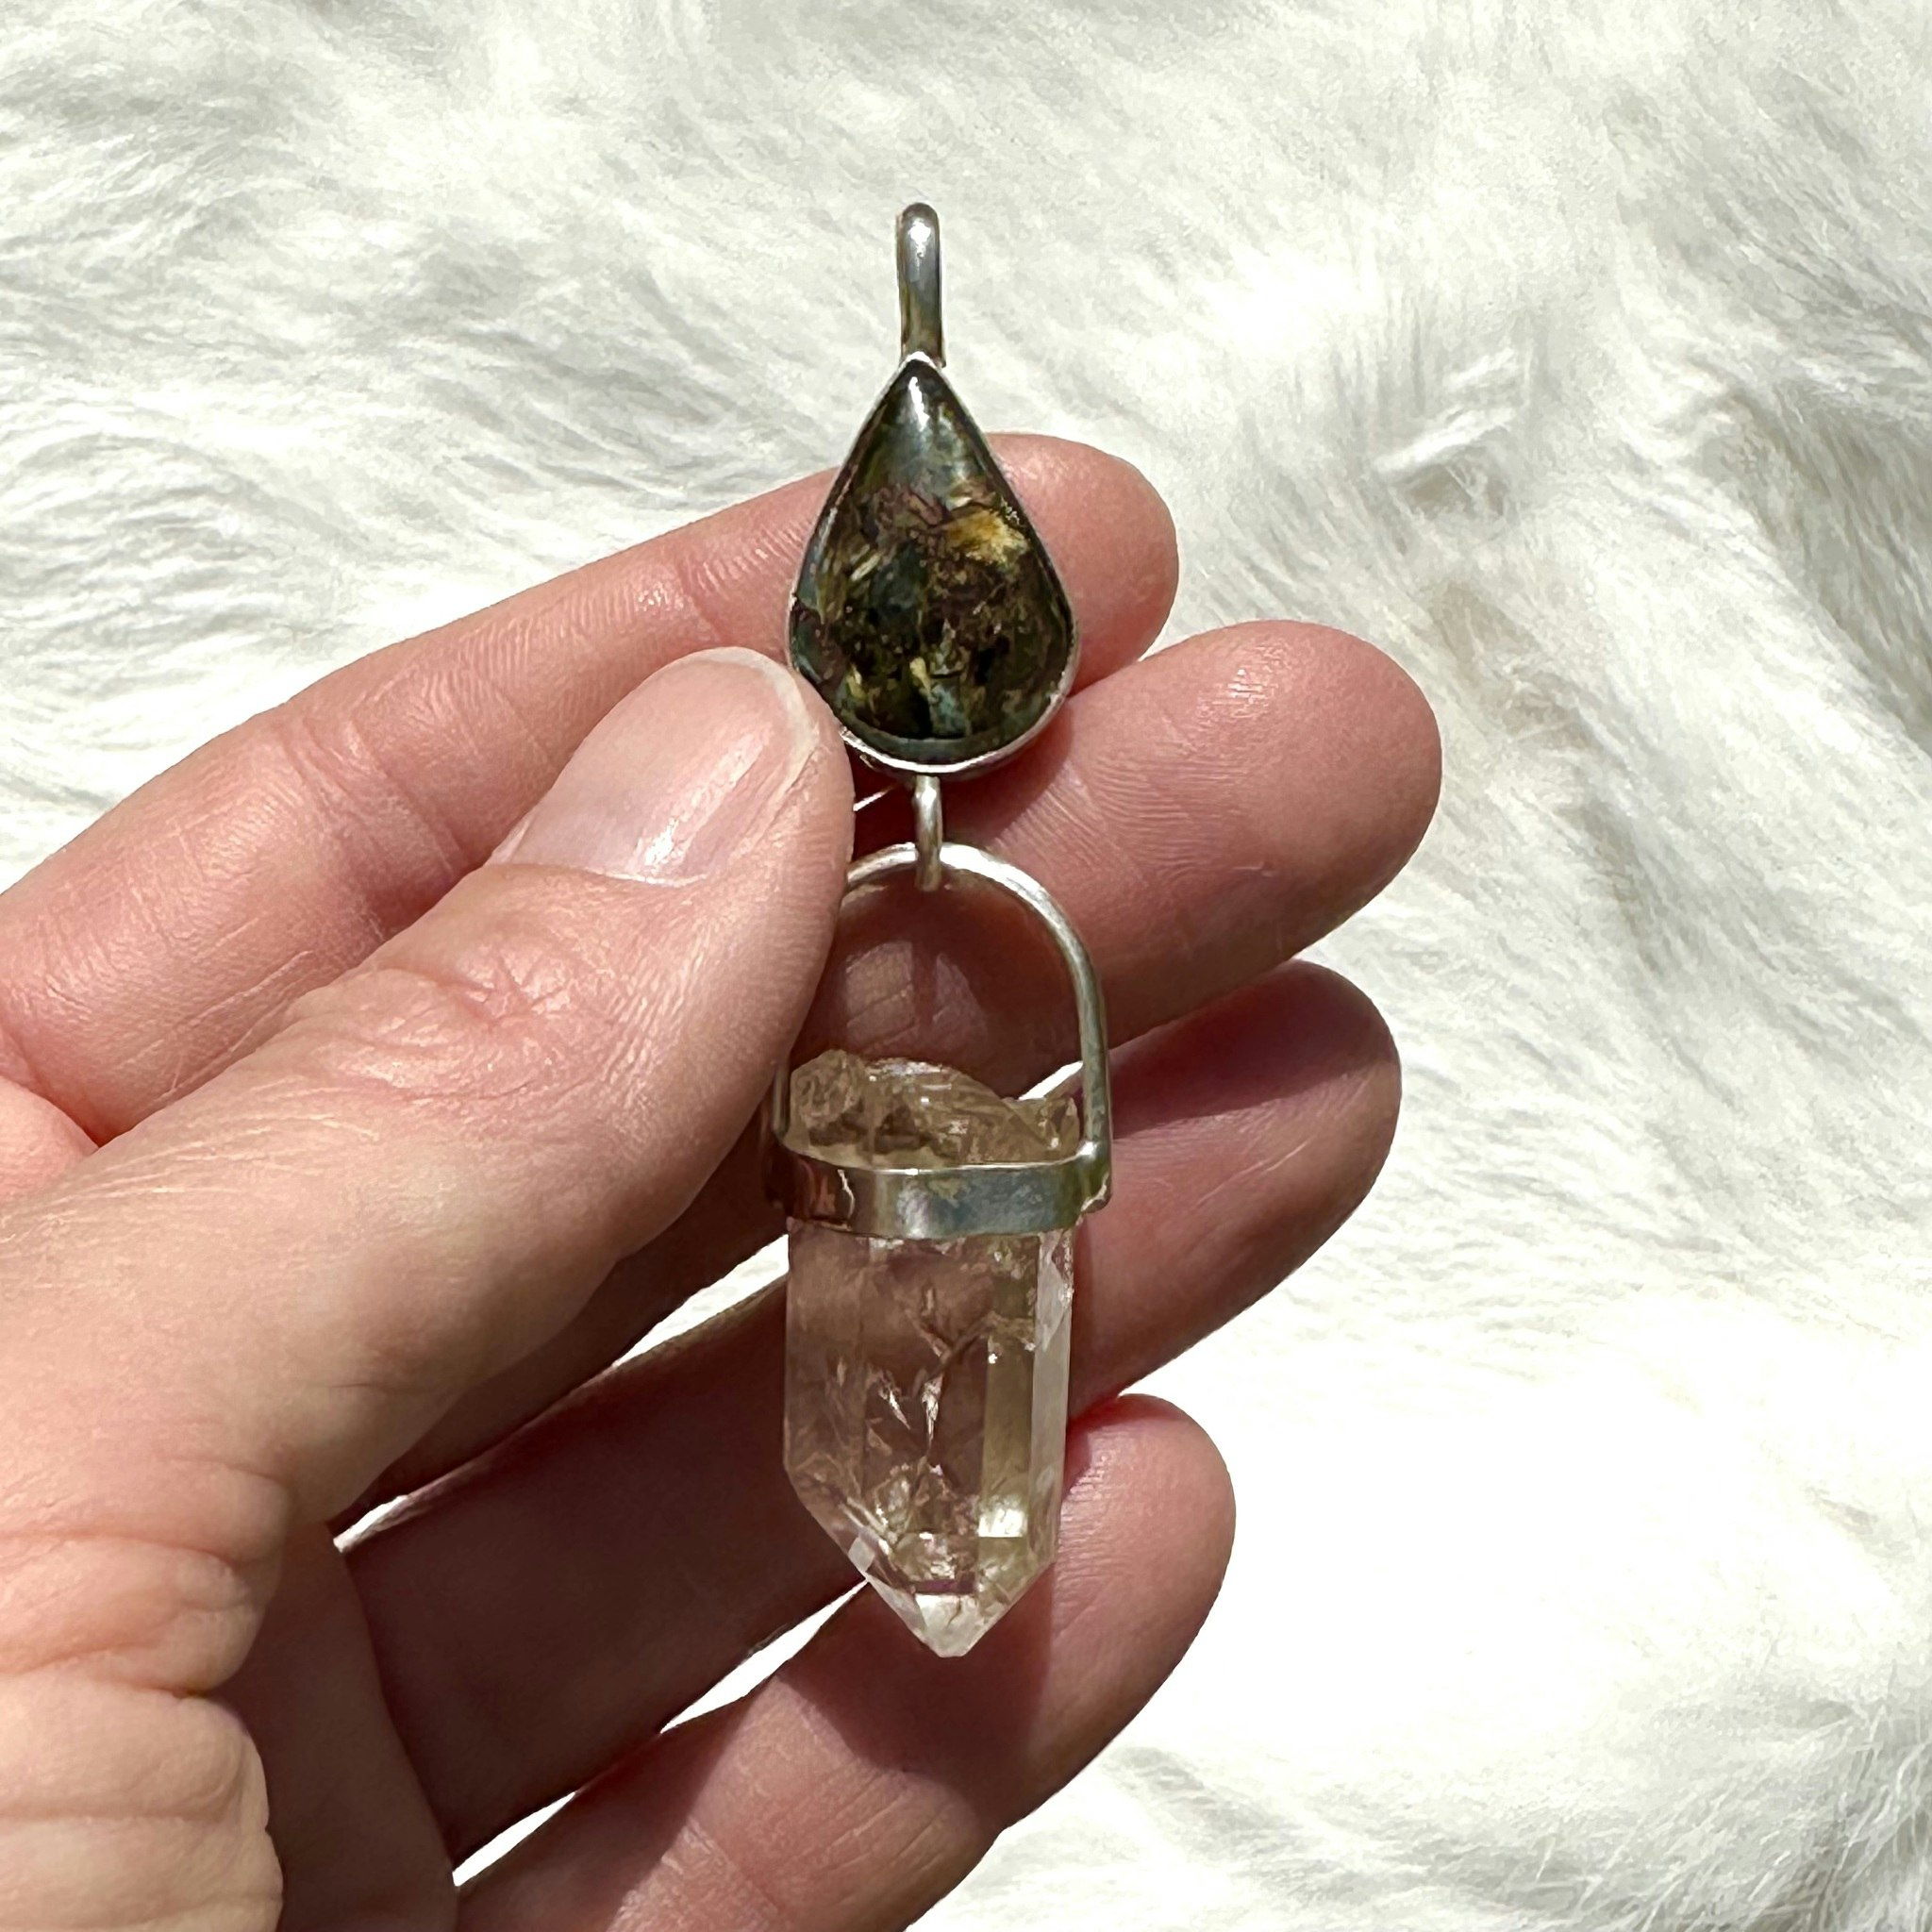 Pietsersite with clear quartz from Sweden